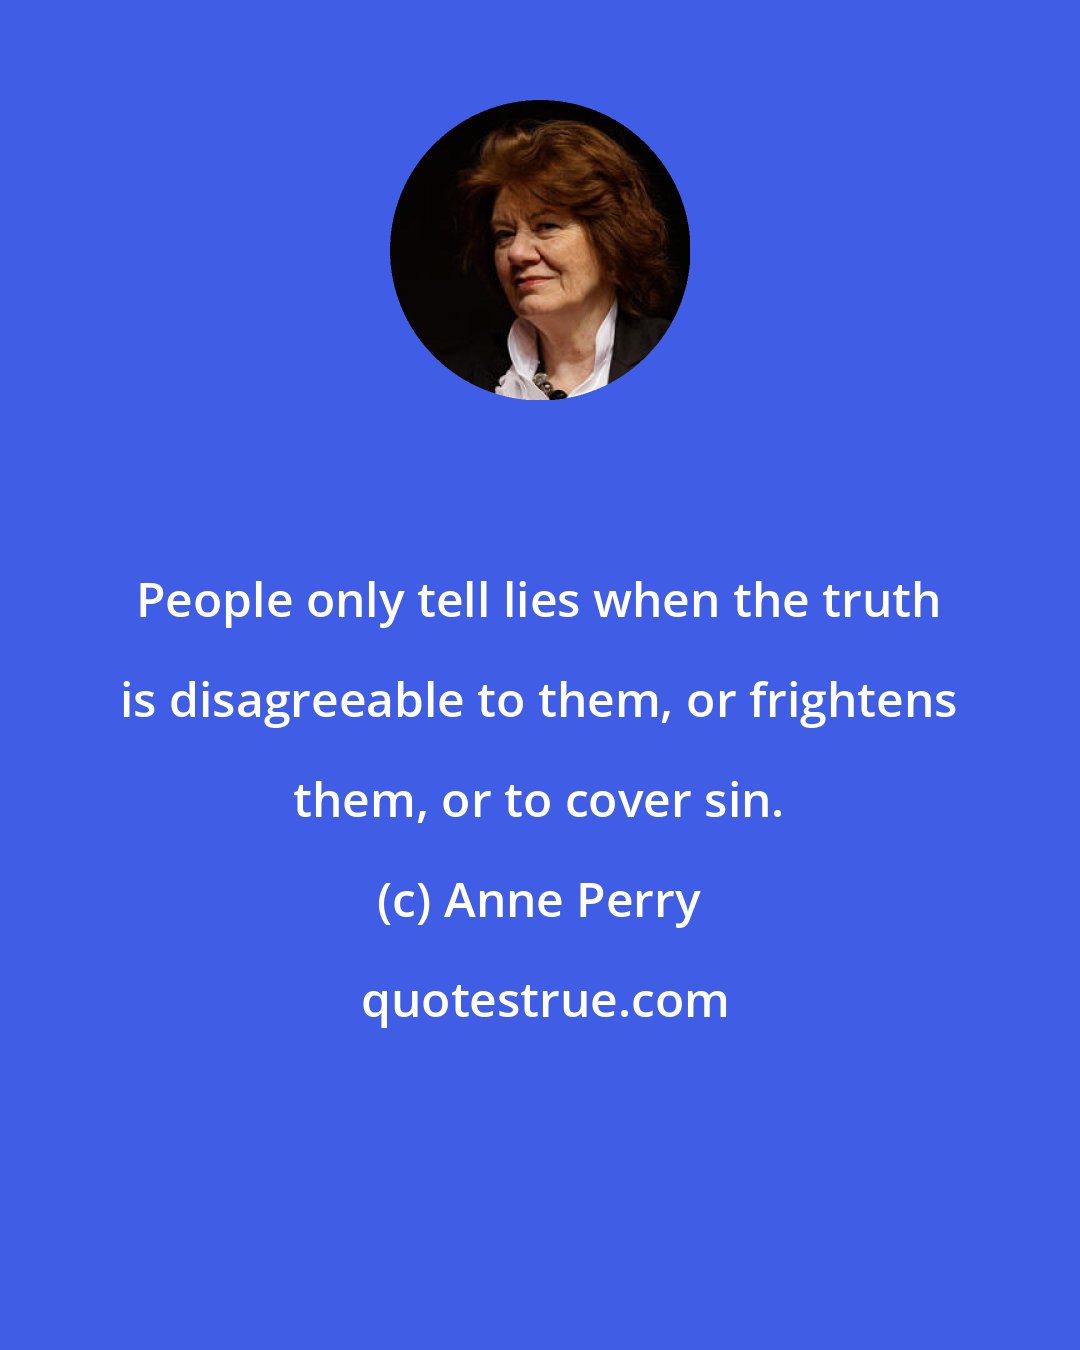 Anne Perry: People only tell lies when the truth is disagreeable to them, or frightens them, or to cover sin.